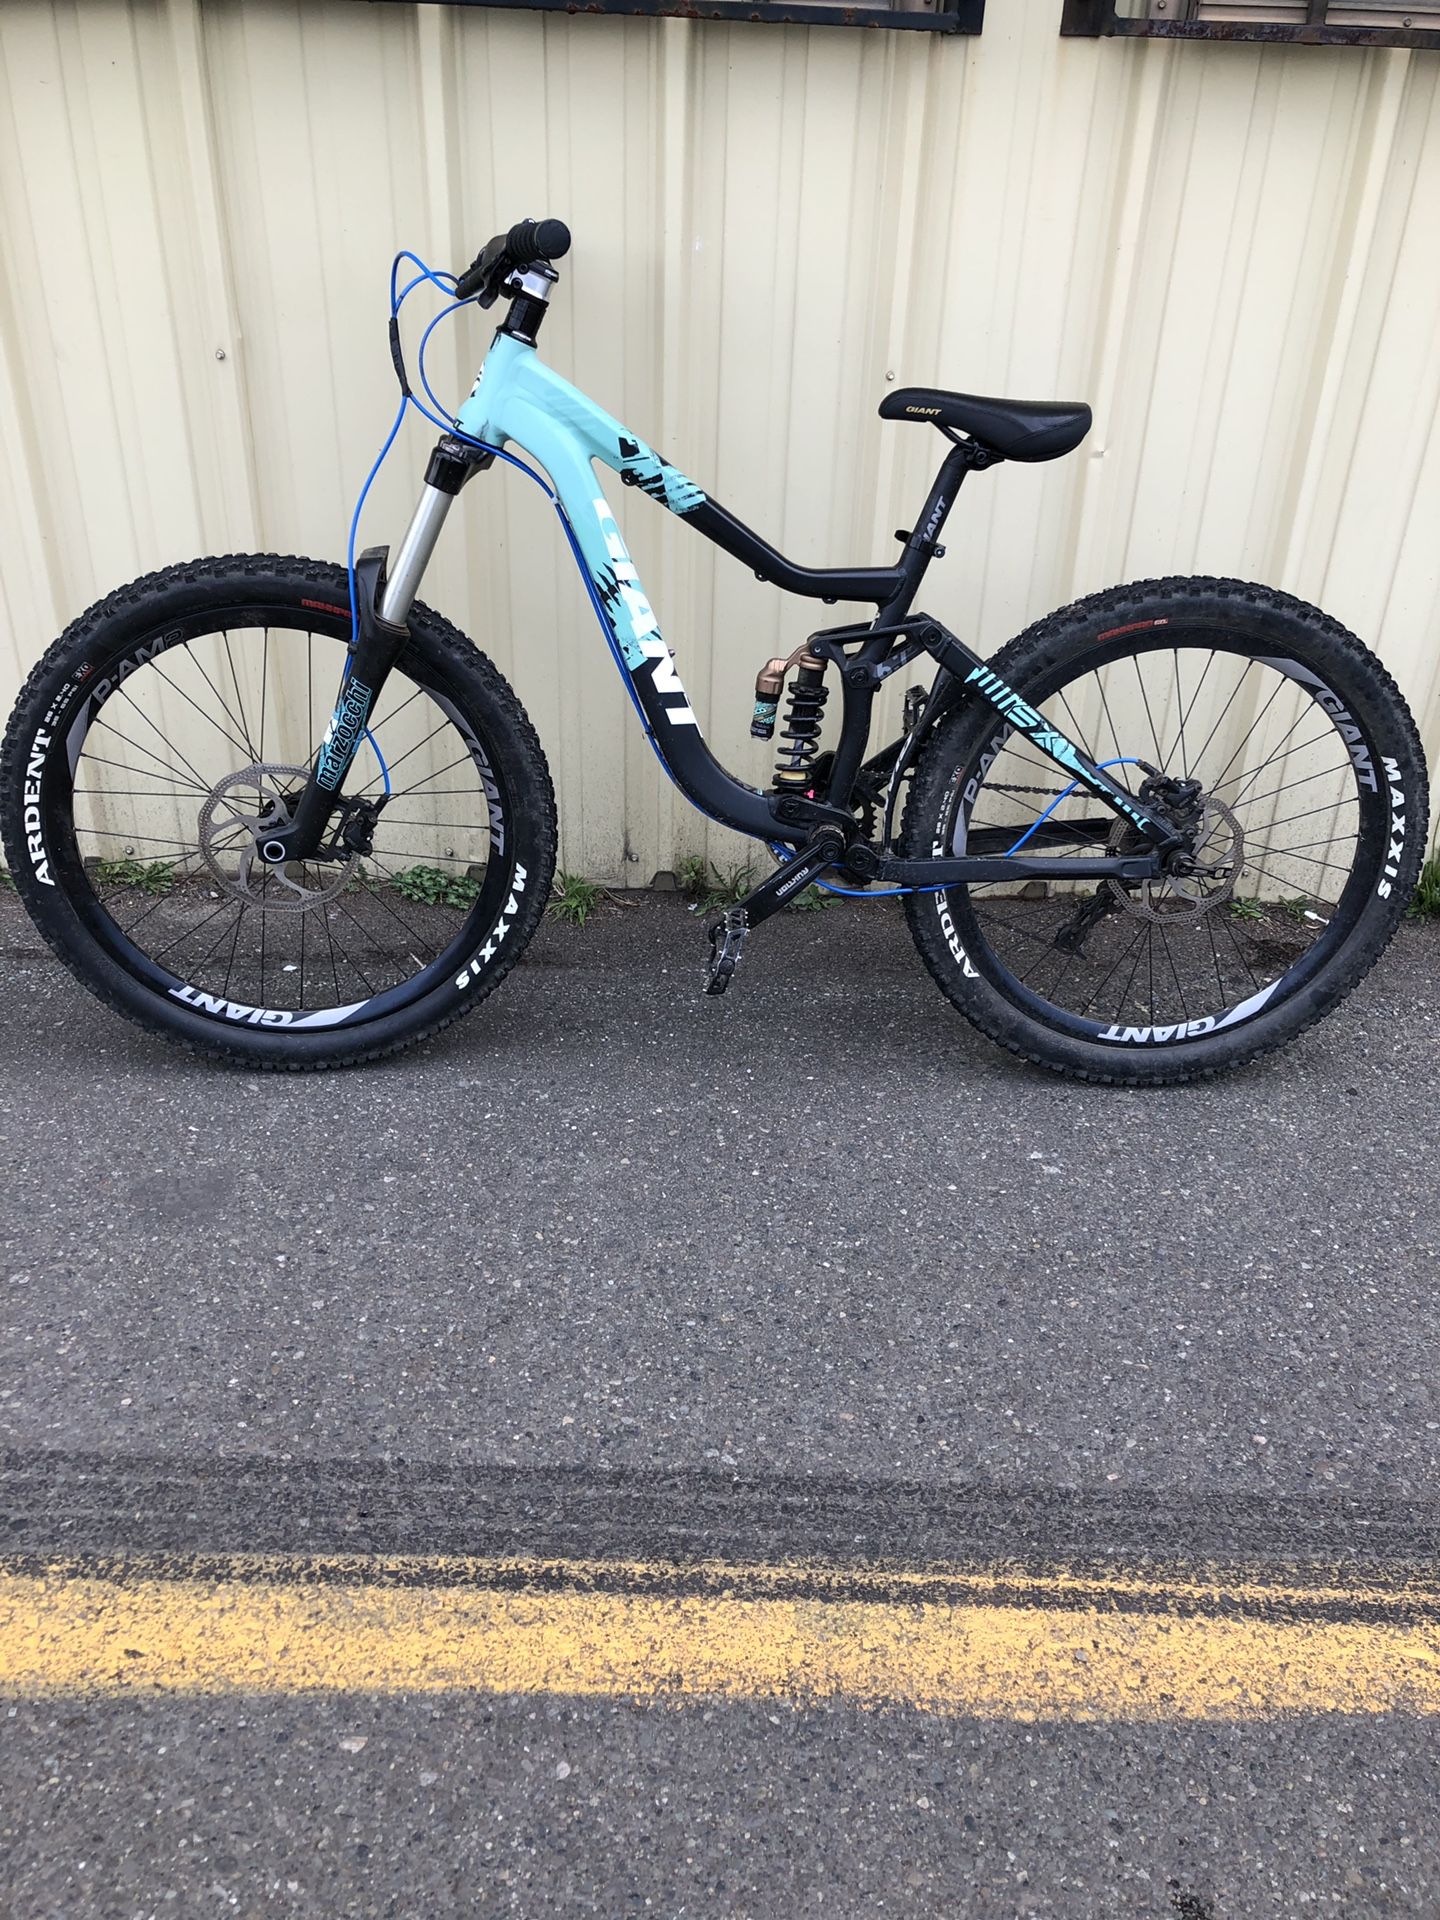 Giant downhill full suspension for sale nice bike a lot of fun just don’t ride anymore $1000 obo bike was 2700 new. Will also entertain trades.